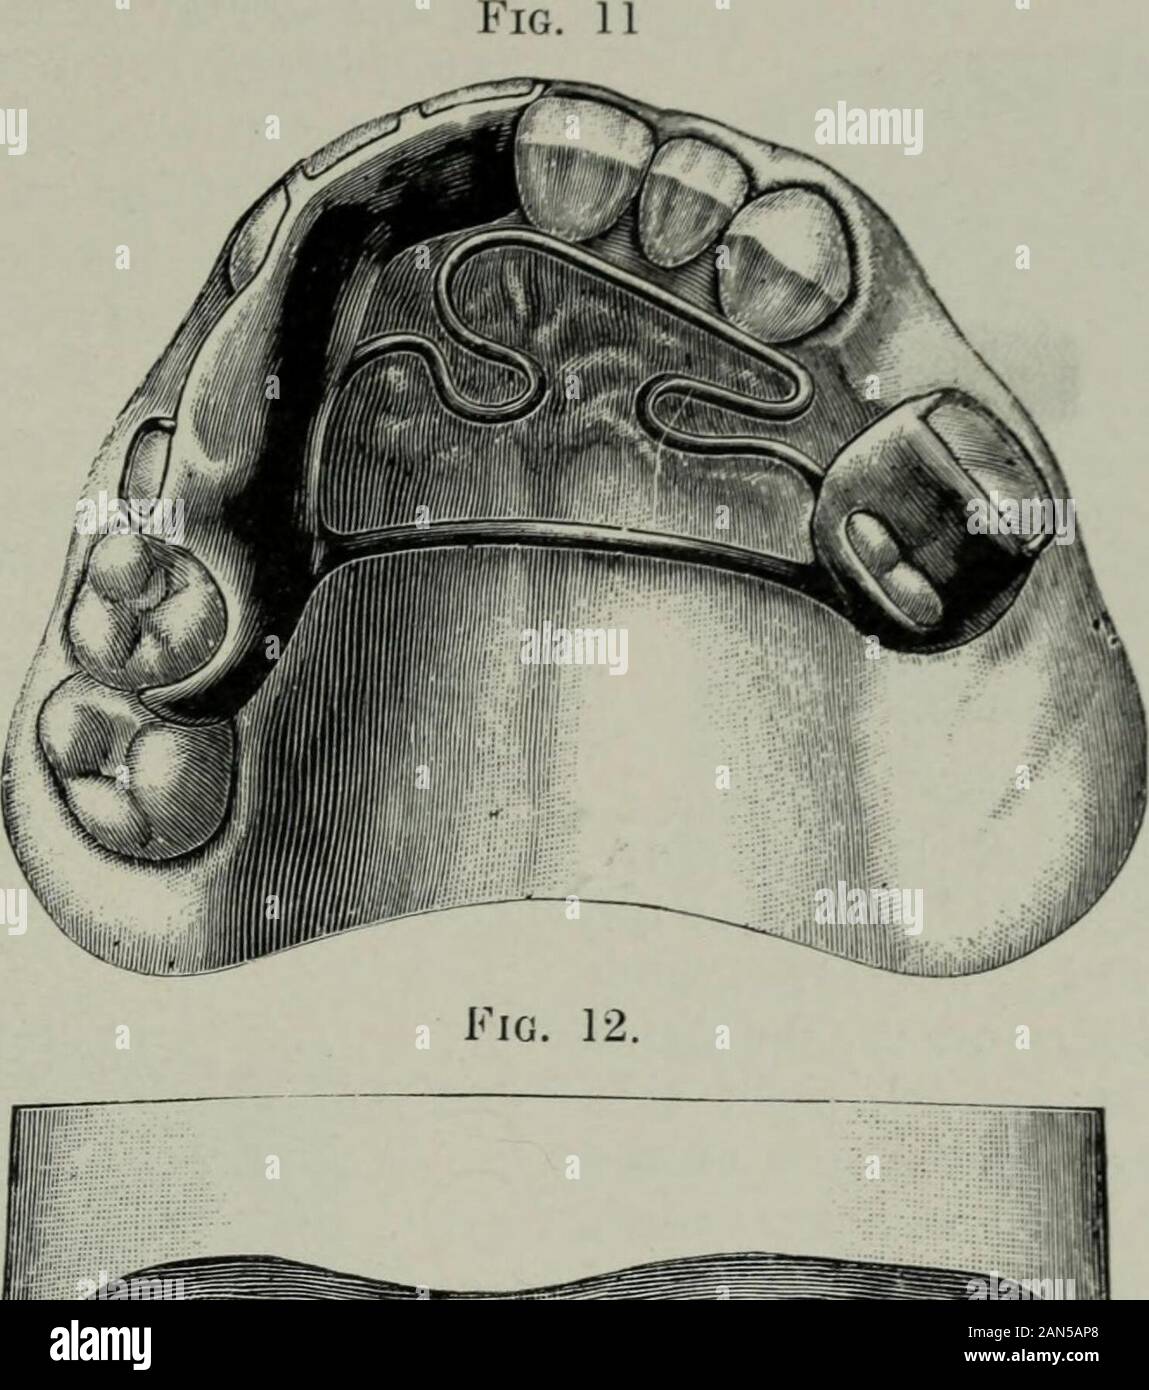 The Dental cosmos . od anchoragefor the correction of the irregular teeth.A device was arranged to open the bite, inorder to thus facilitate the movementof the irregularly placed teeth, and at thesame time to secure additional anchorageby making possible the attachment of theappliance to the upper incisors and ca-nine on the opposite side of the arch.A spring-clasp attachment was arrangedover the upper left first molar, the onlyremaining anchorage tooth on that side,and a spring-clasp attachment over the JACKSON.—ORTHODONTIA. 349 upper right second bicuspid—the firstbicuspid having been remove Stock Photo